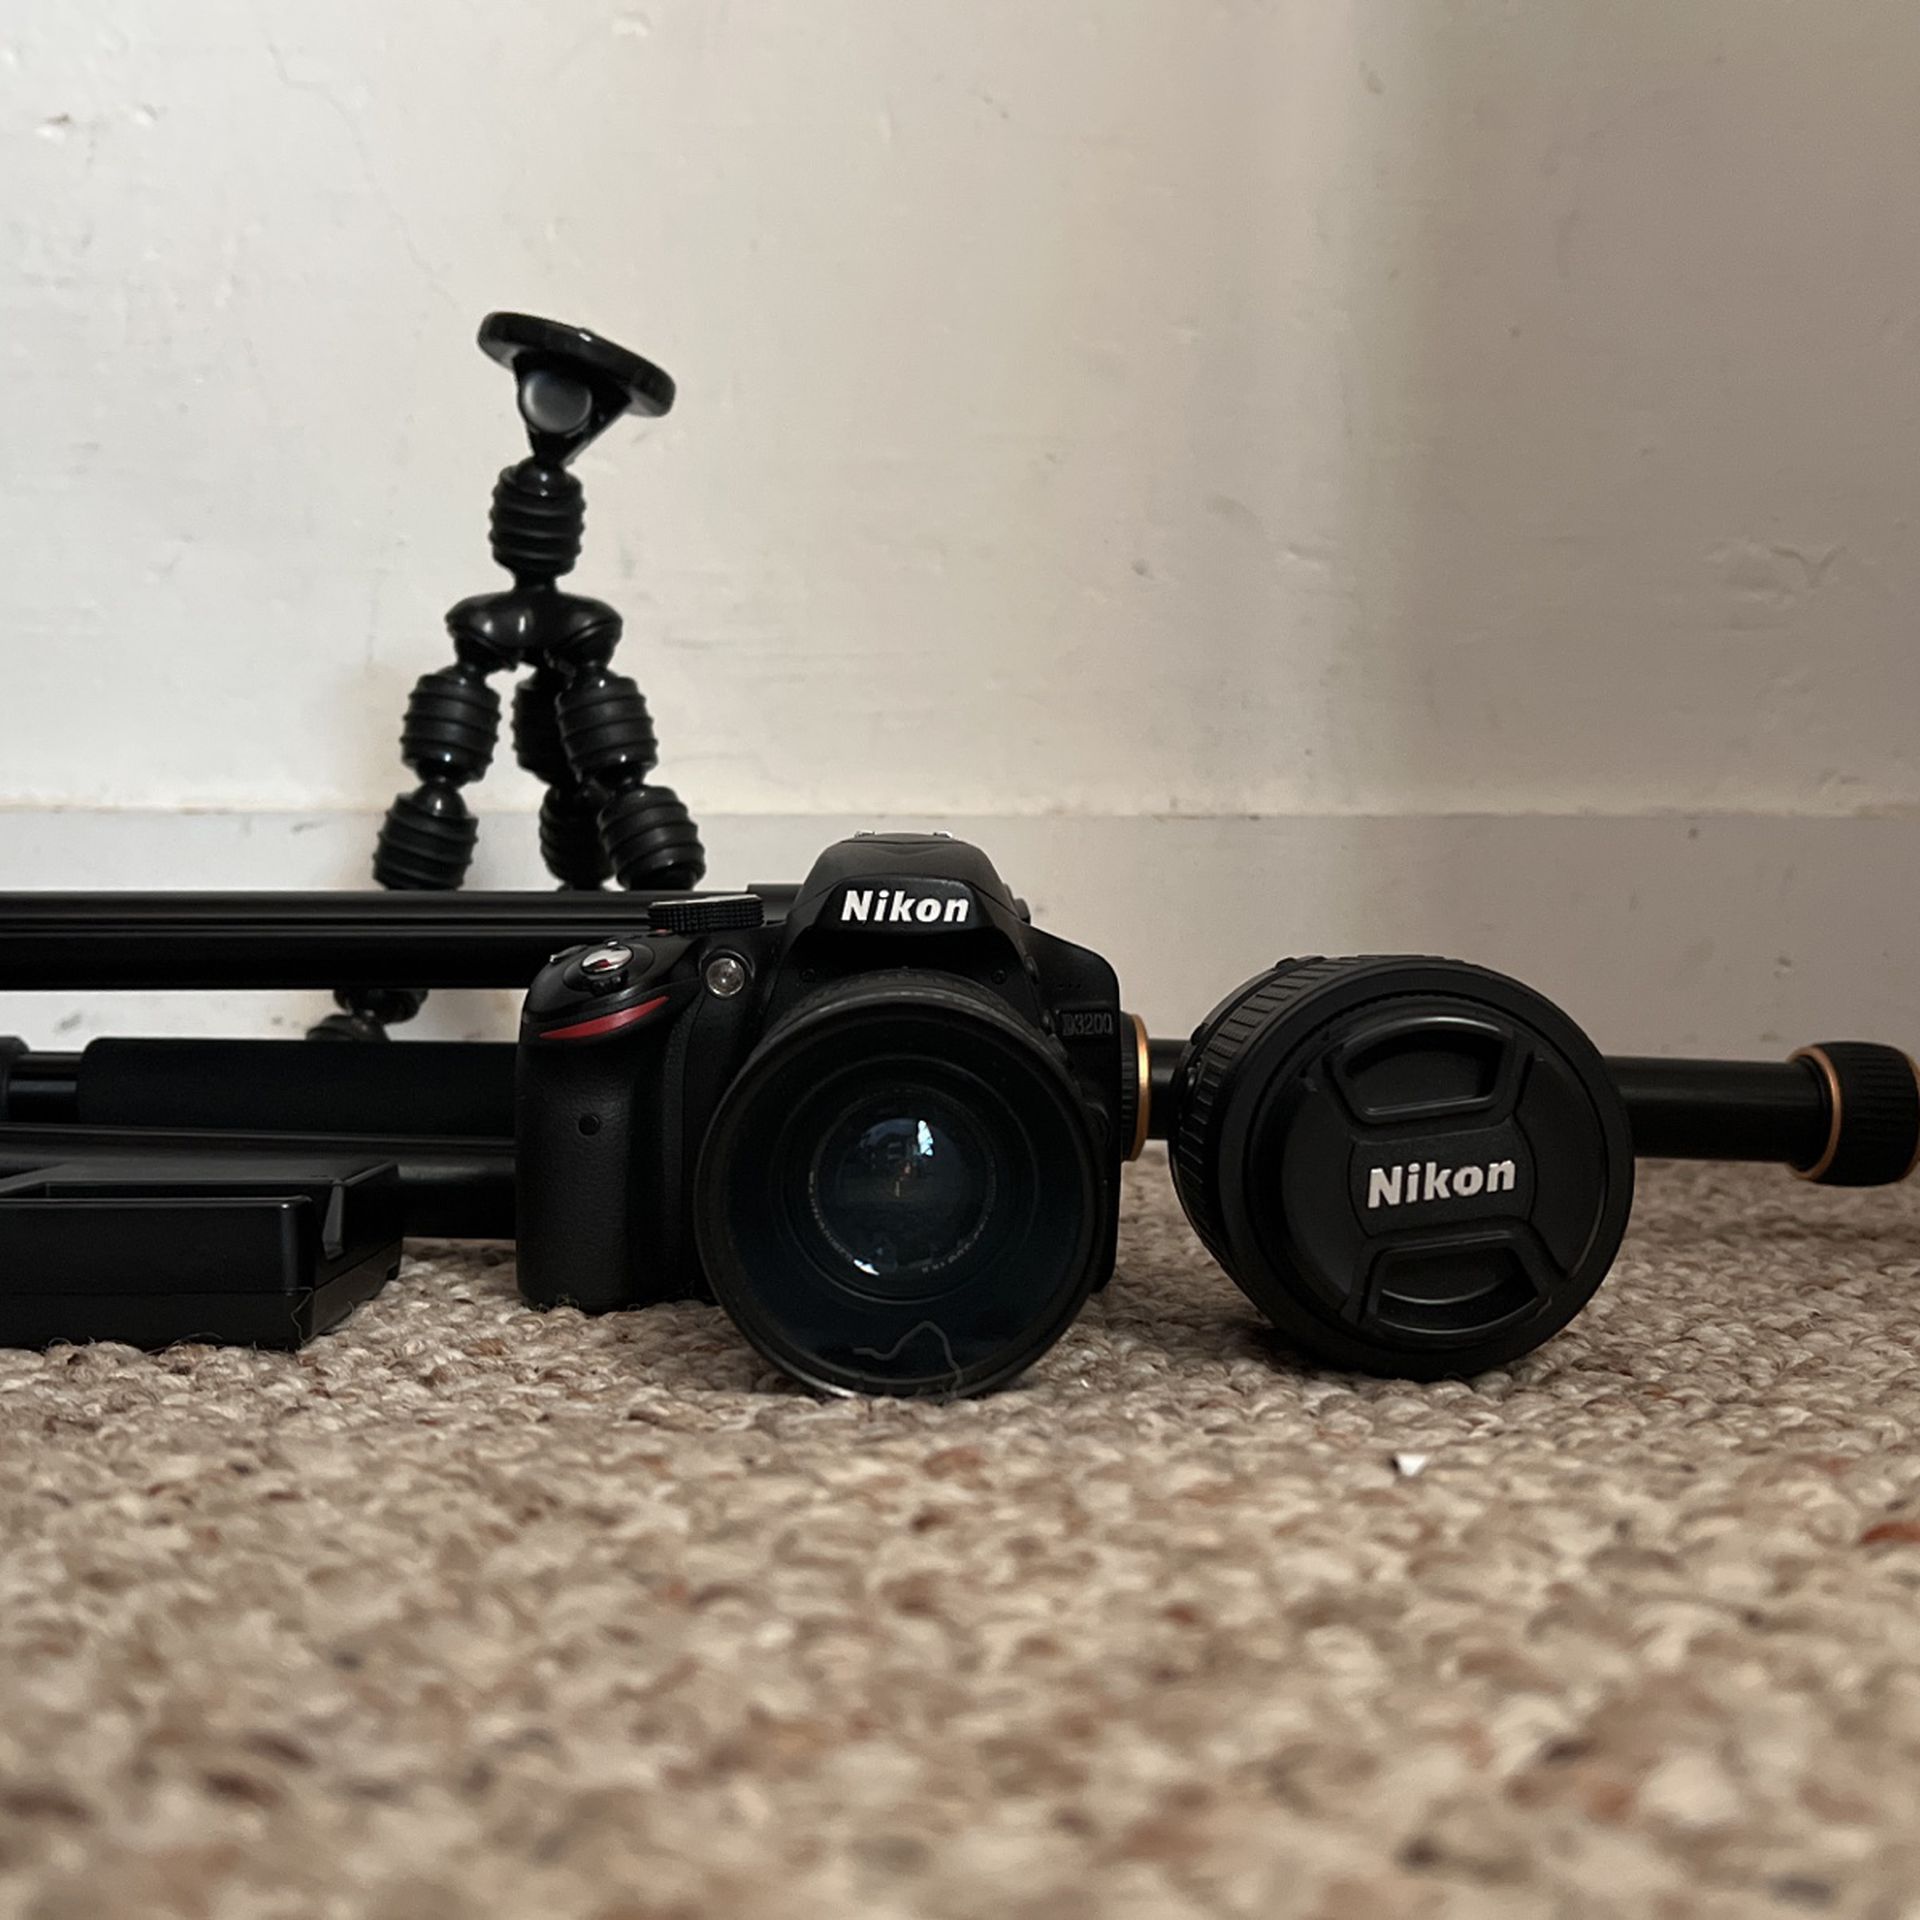 Nikon D3200 With Lens And Tripods